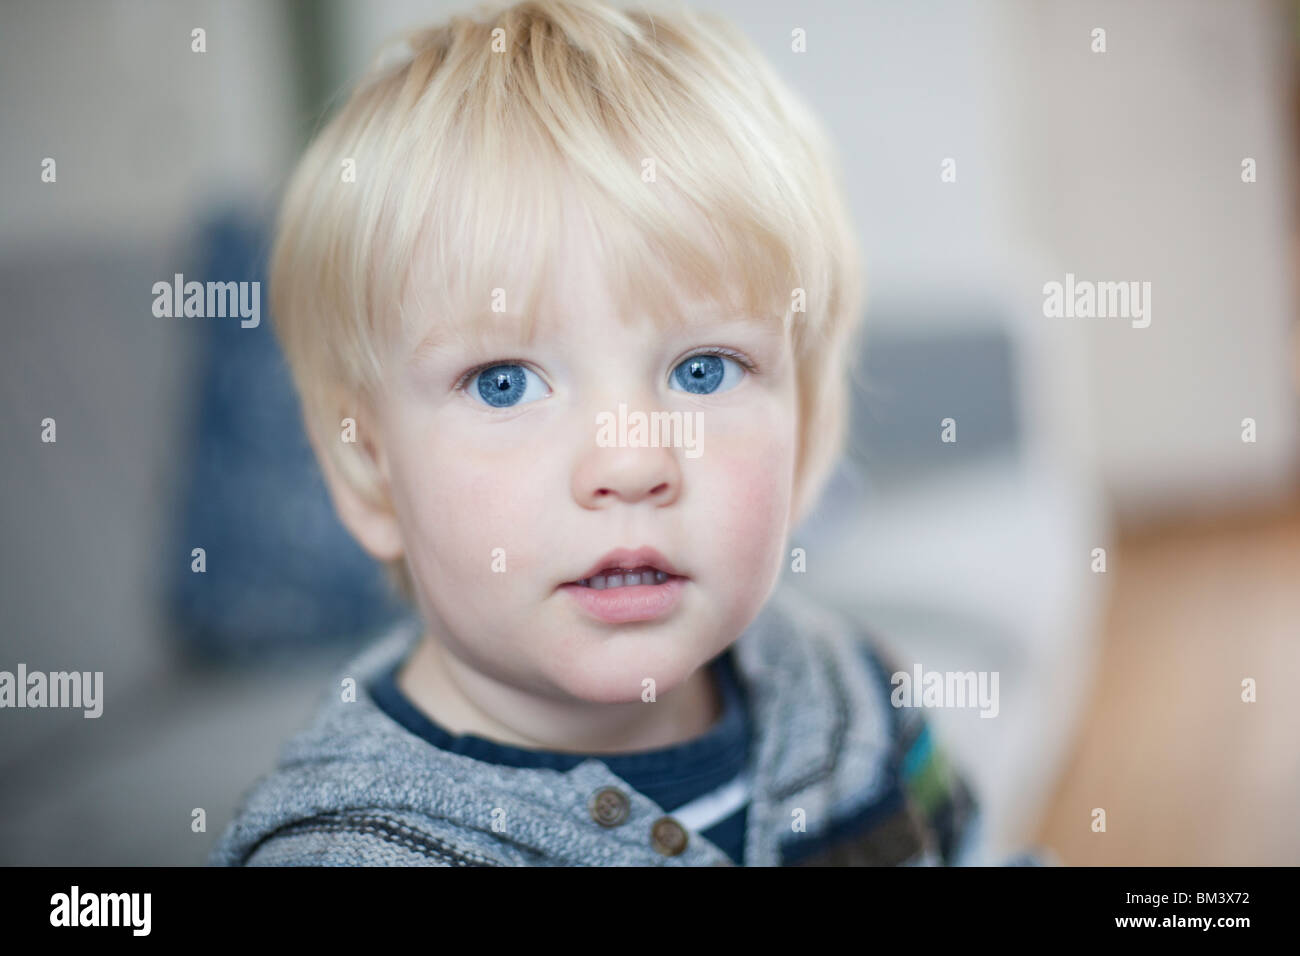 Portrait of a 2 year old boy Stock Photo